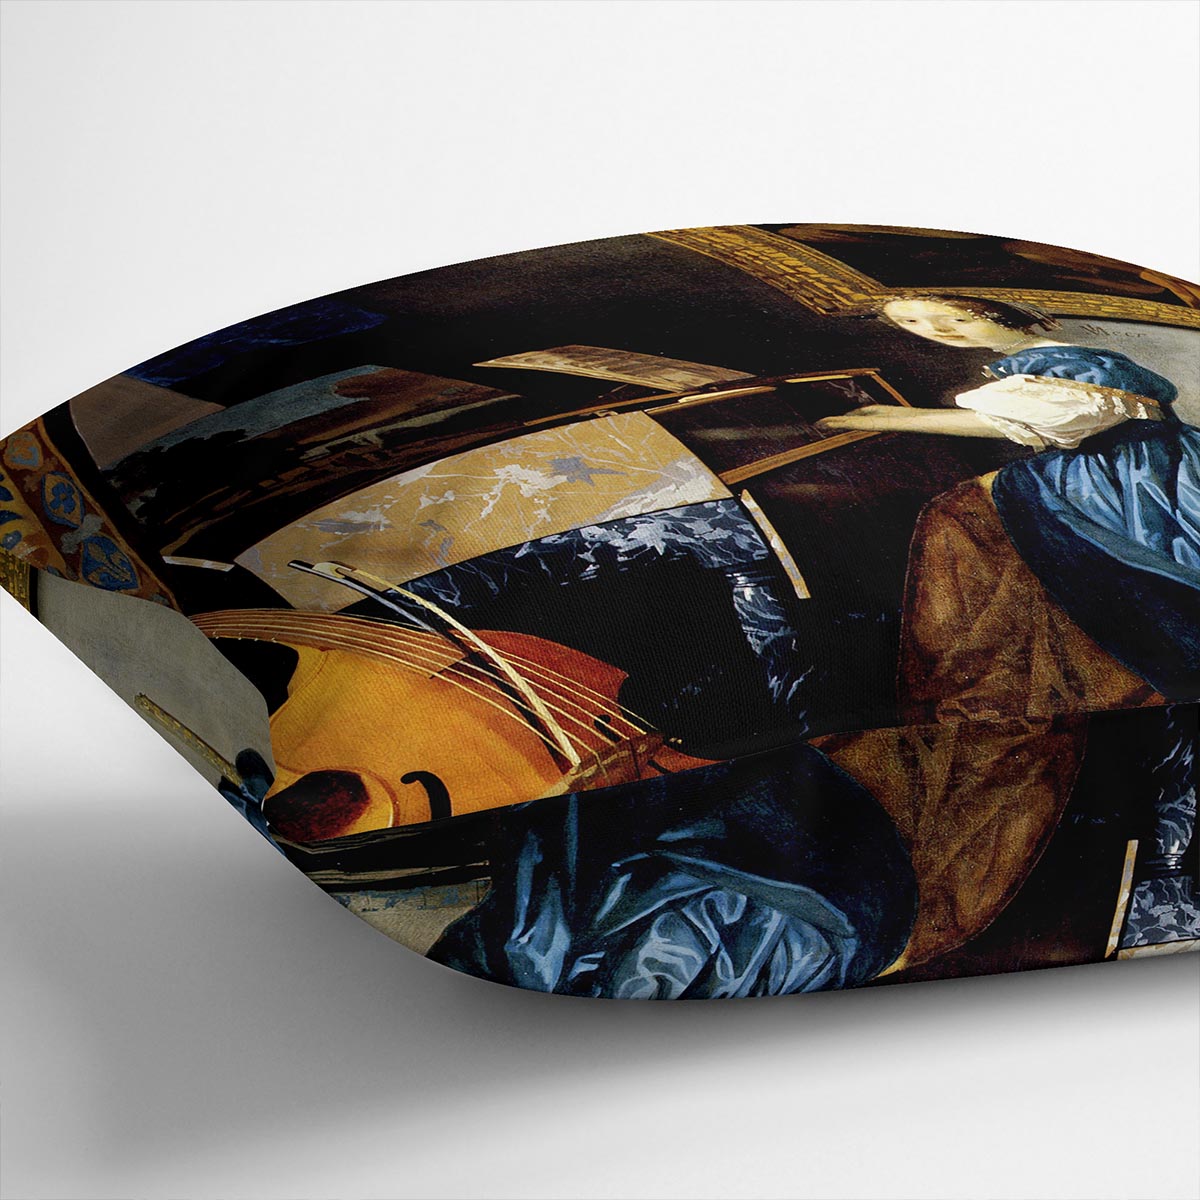 Dame on spinet by Vermeer Cushion